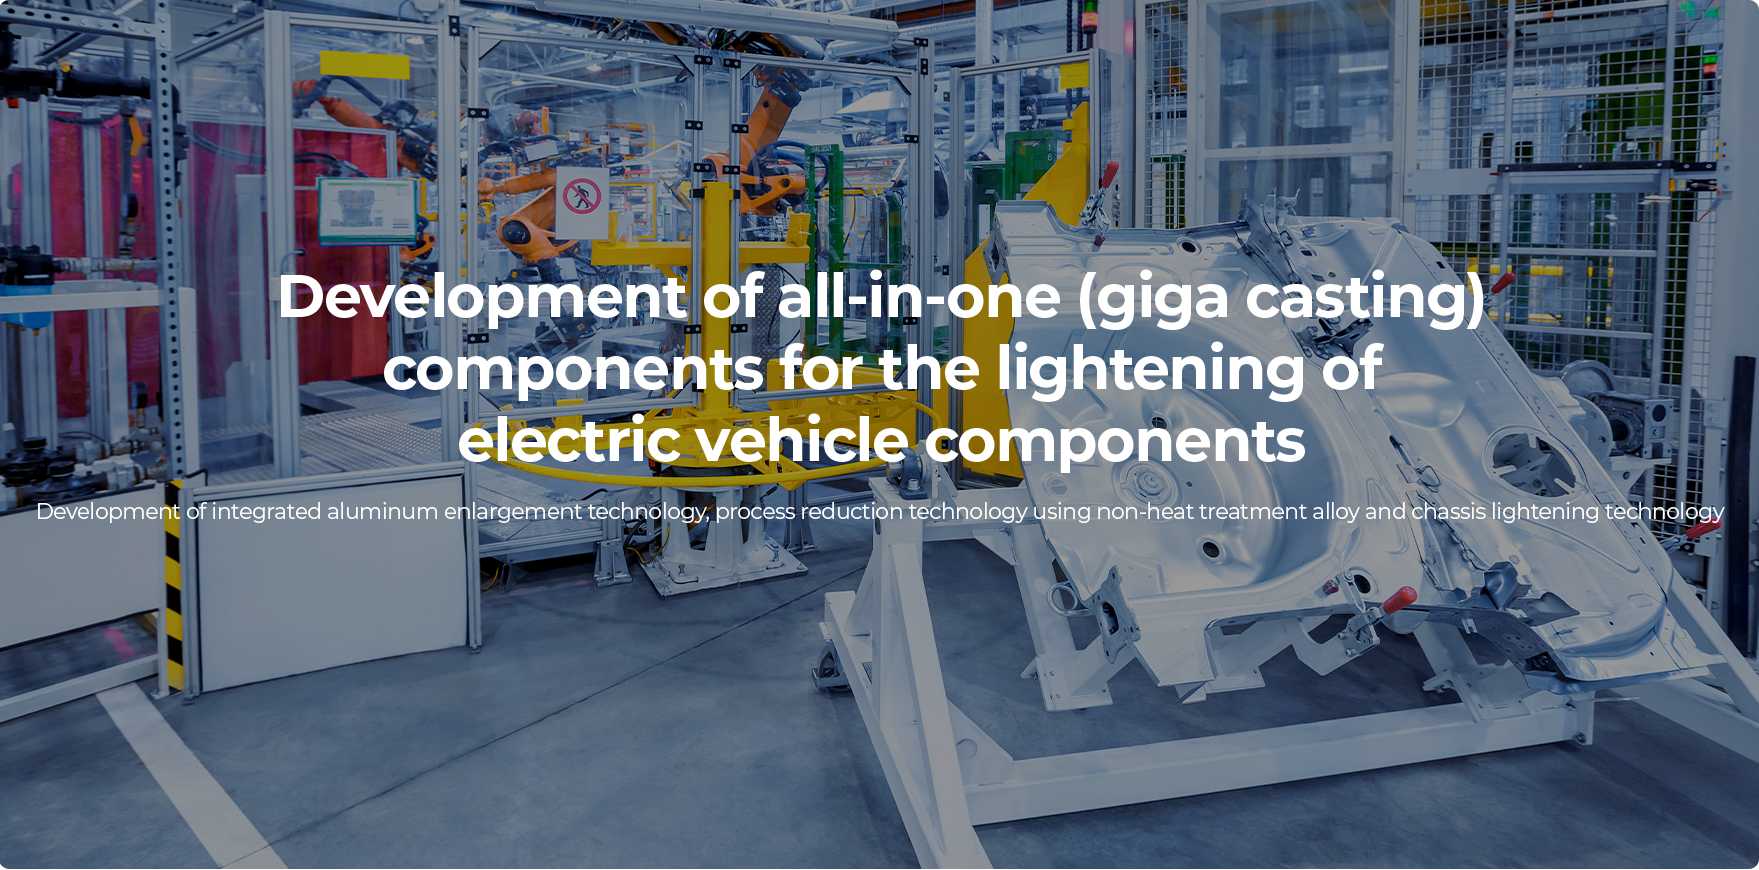 Development of all-in-one (giga casting) components for the lightening of electric vehicle components